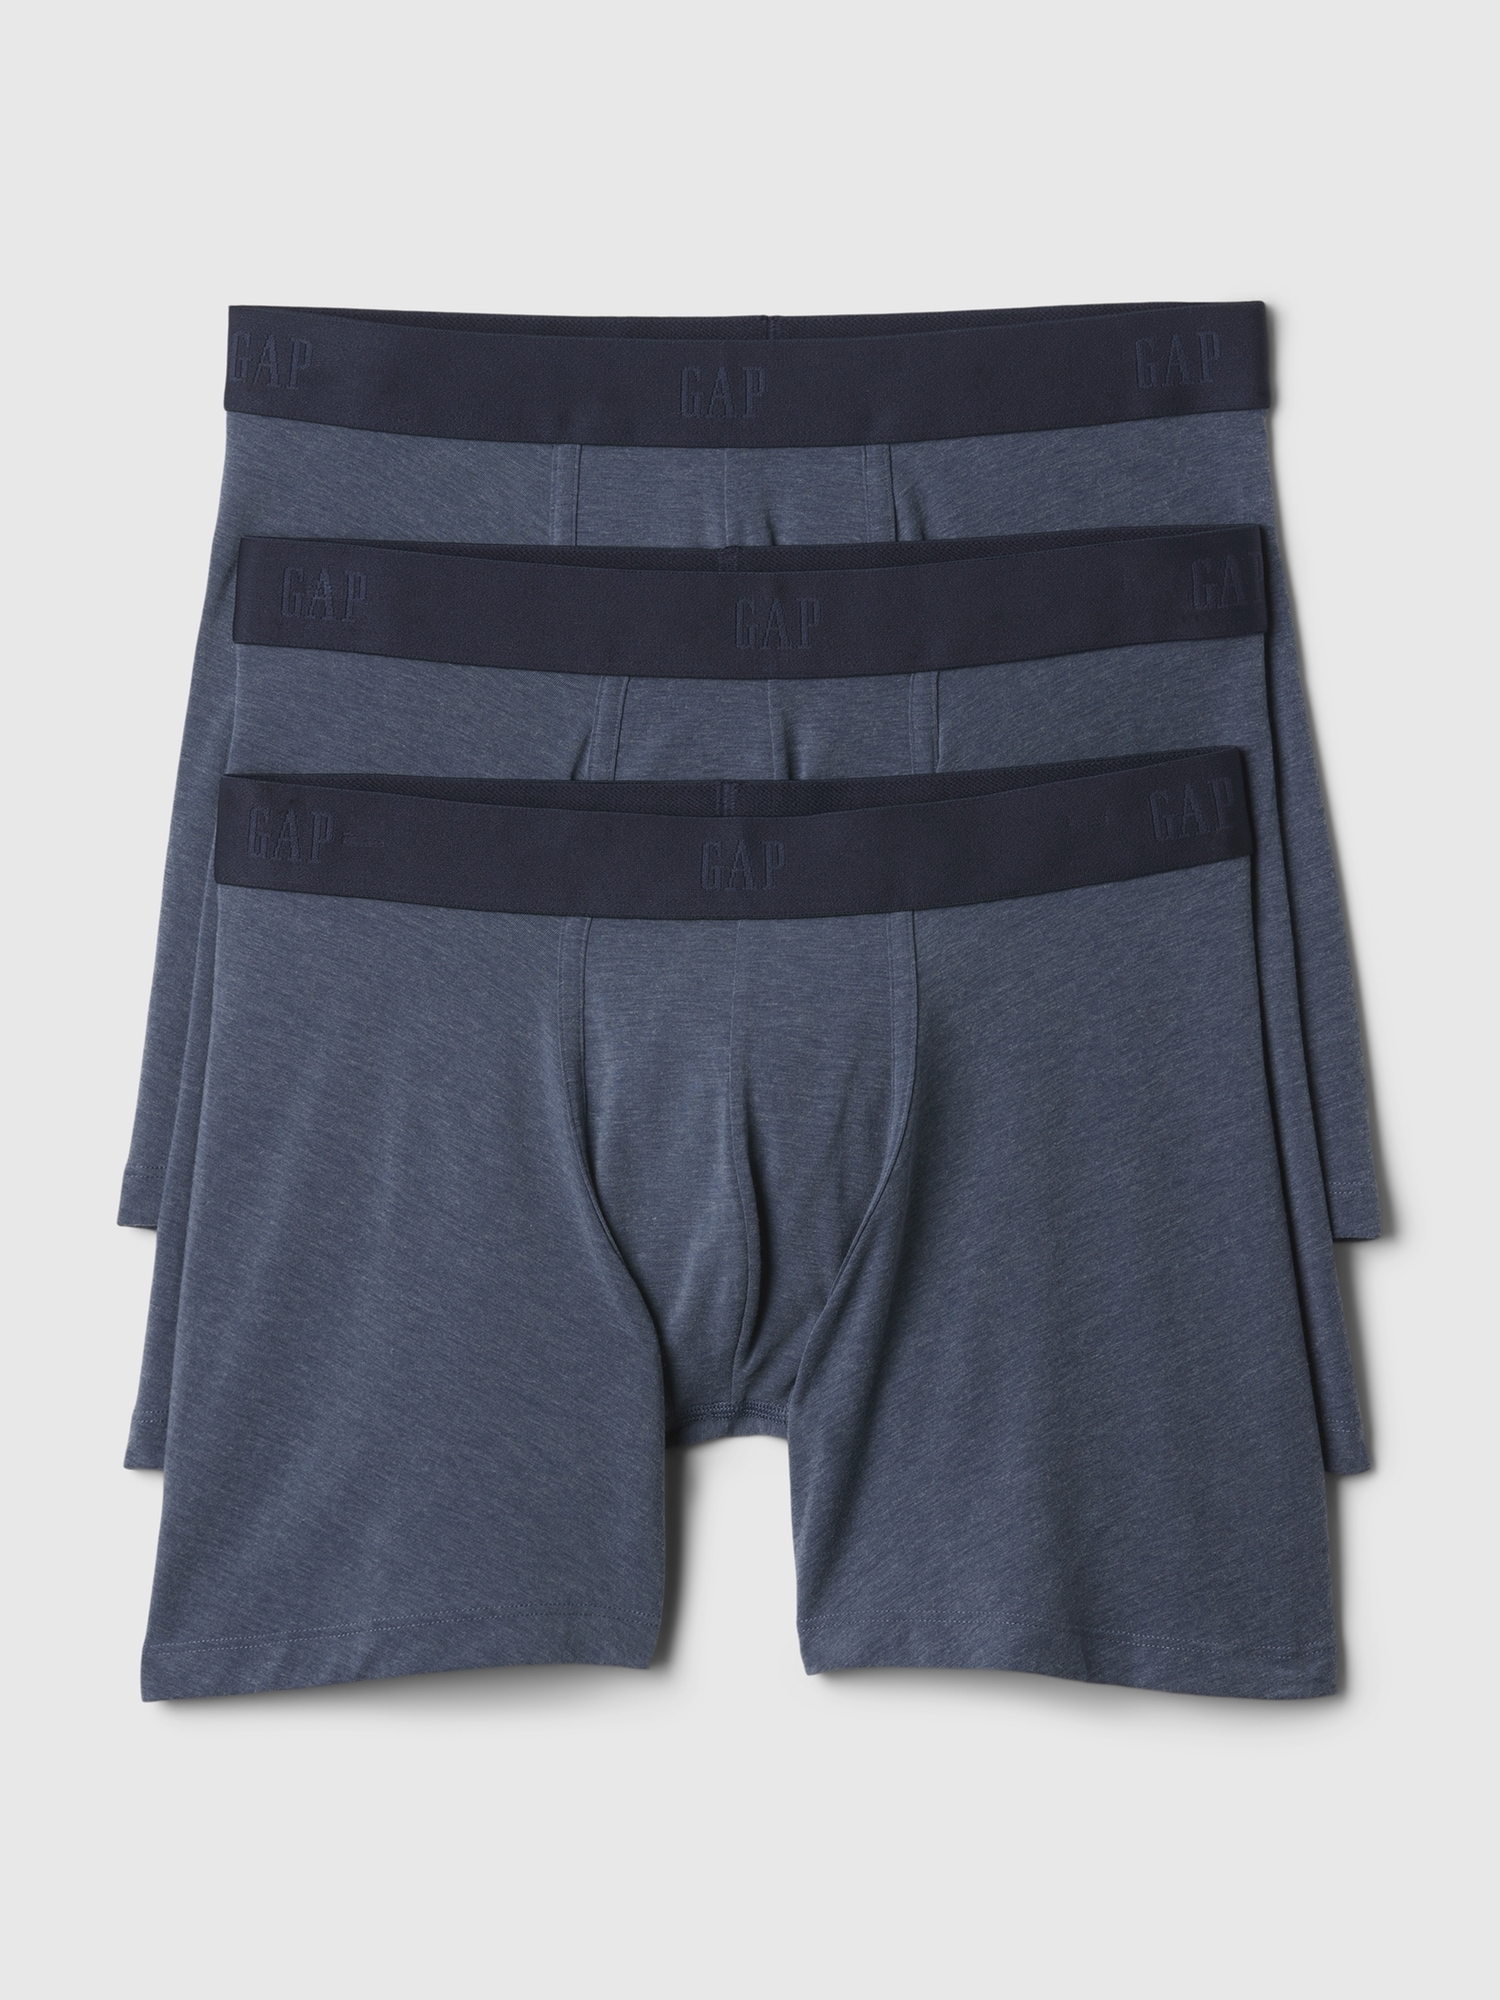 GAP Boys Basic Underwear - Pack of 5 at best price in Ahmedabad by